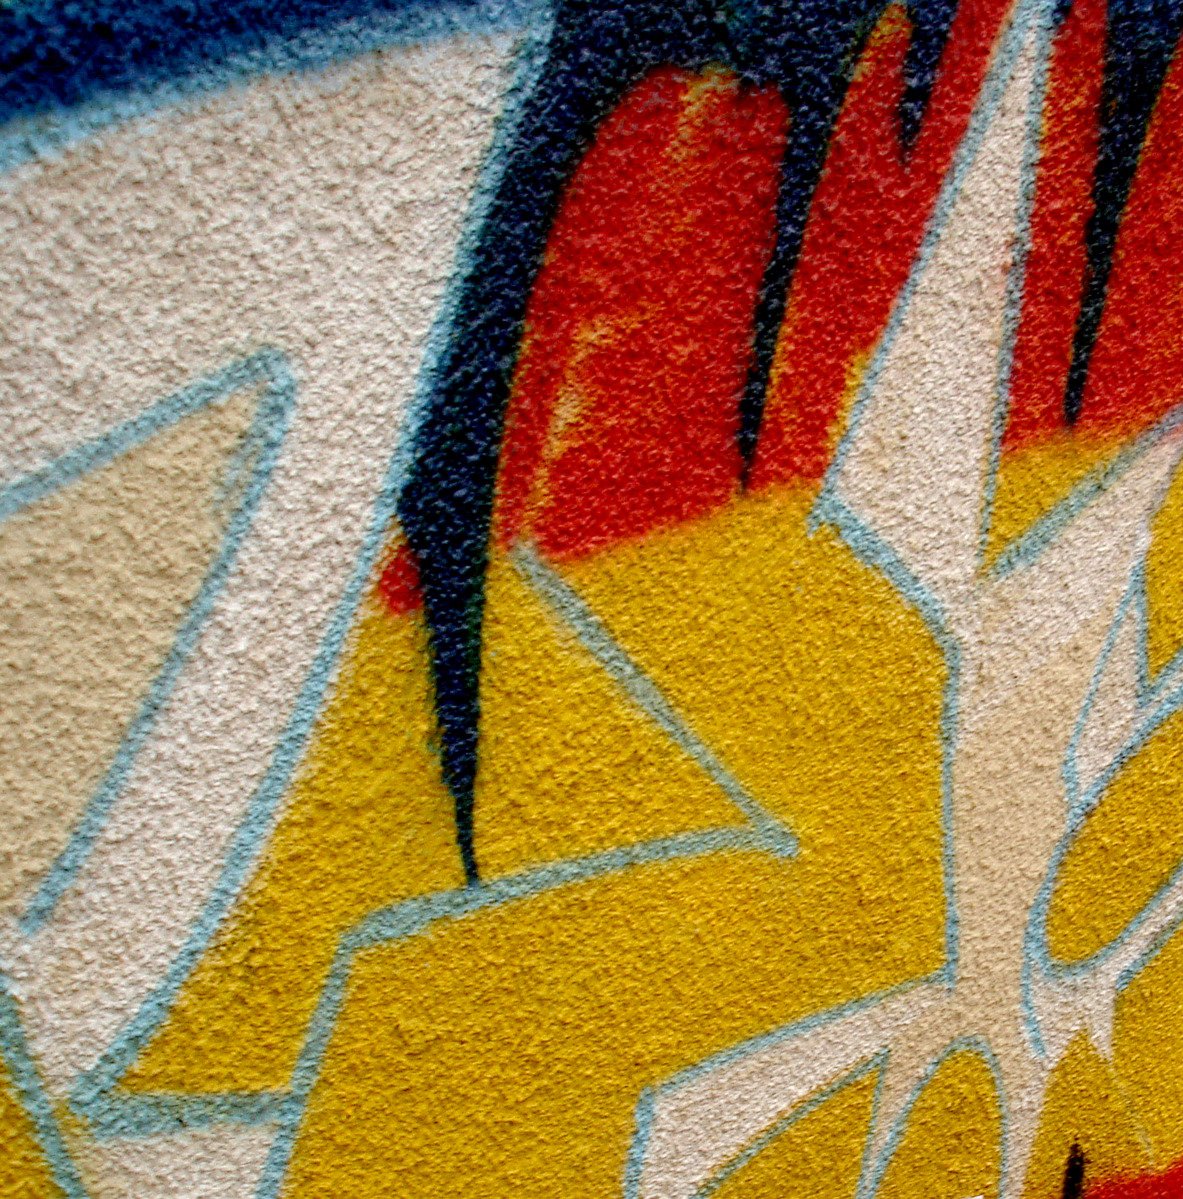 colorful graffiti painting on a wall with yellow, blue, and red